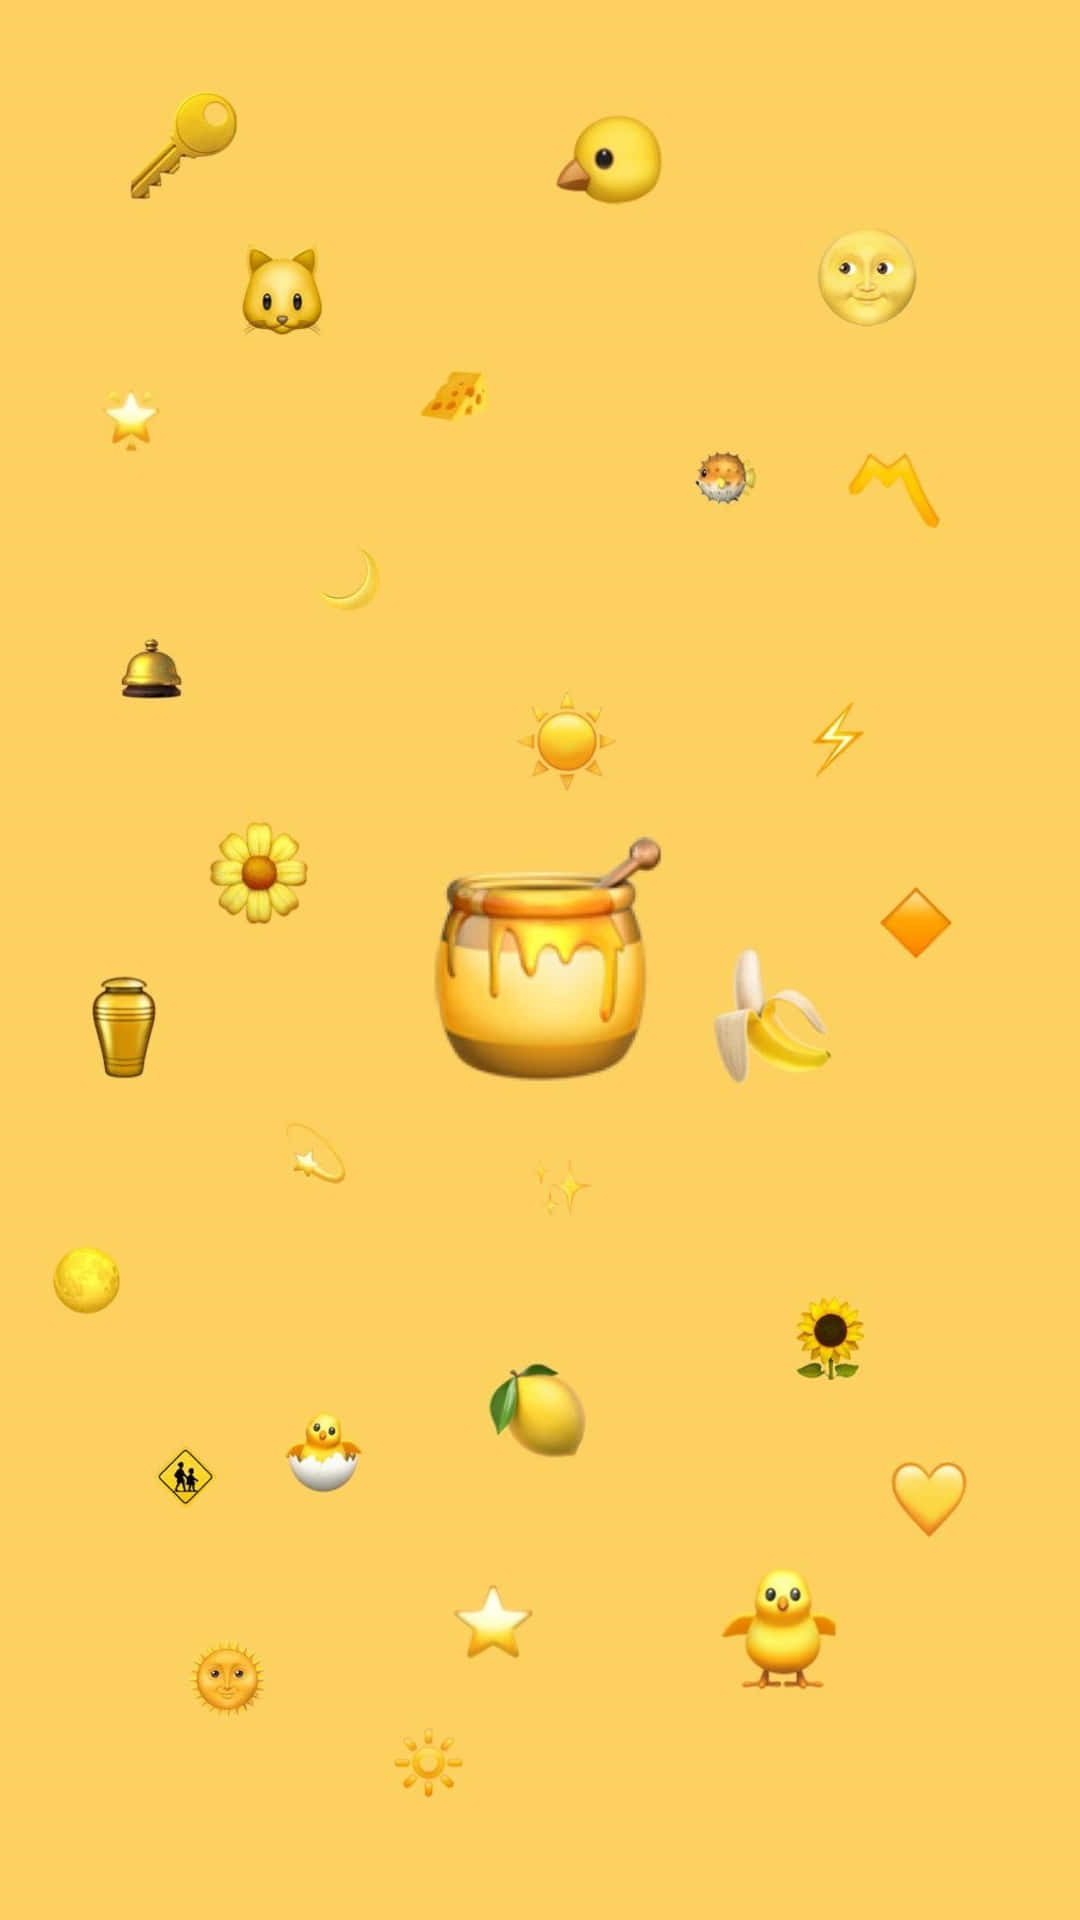 Assorted Yellow Emoji Collection Wallpaper